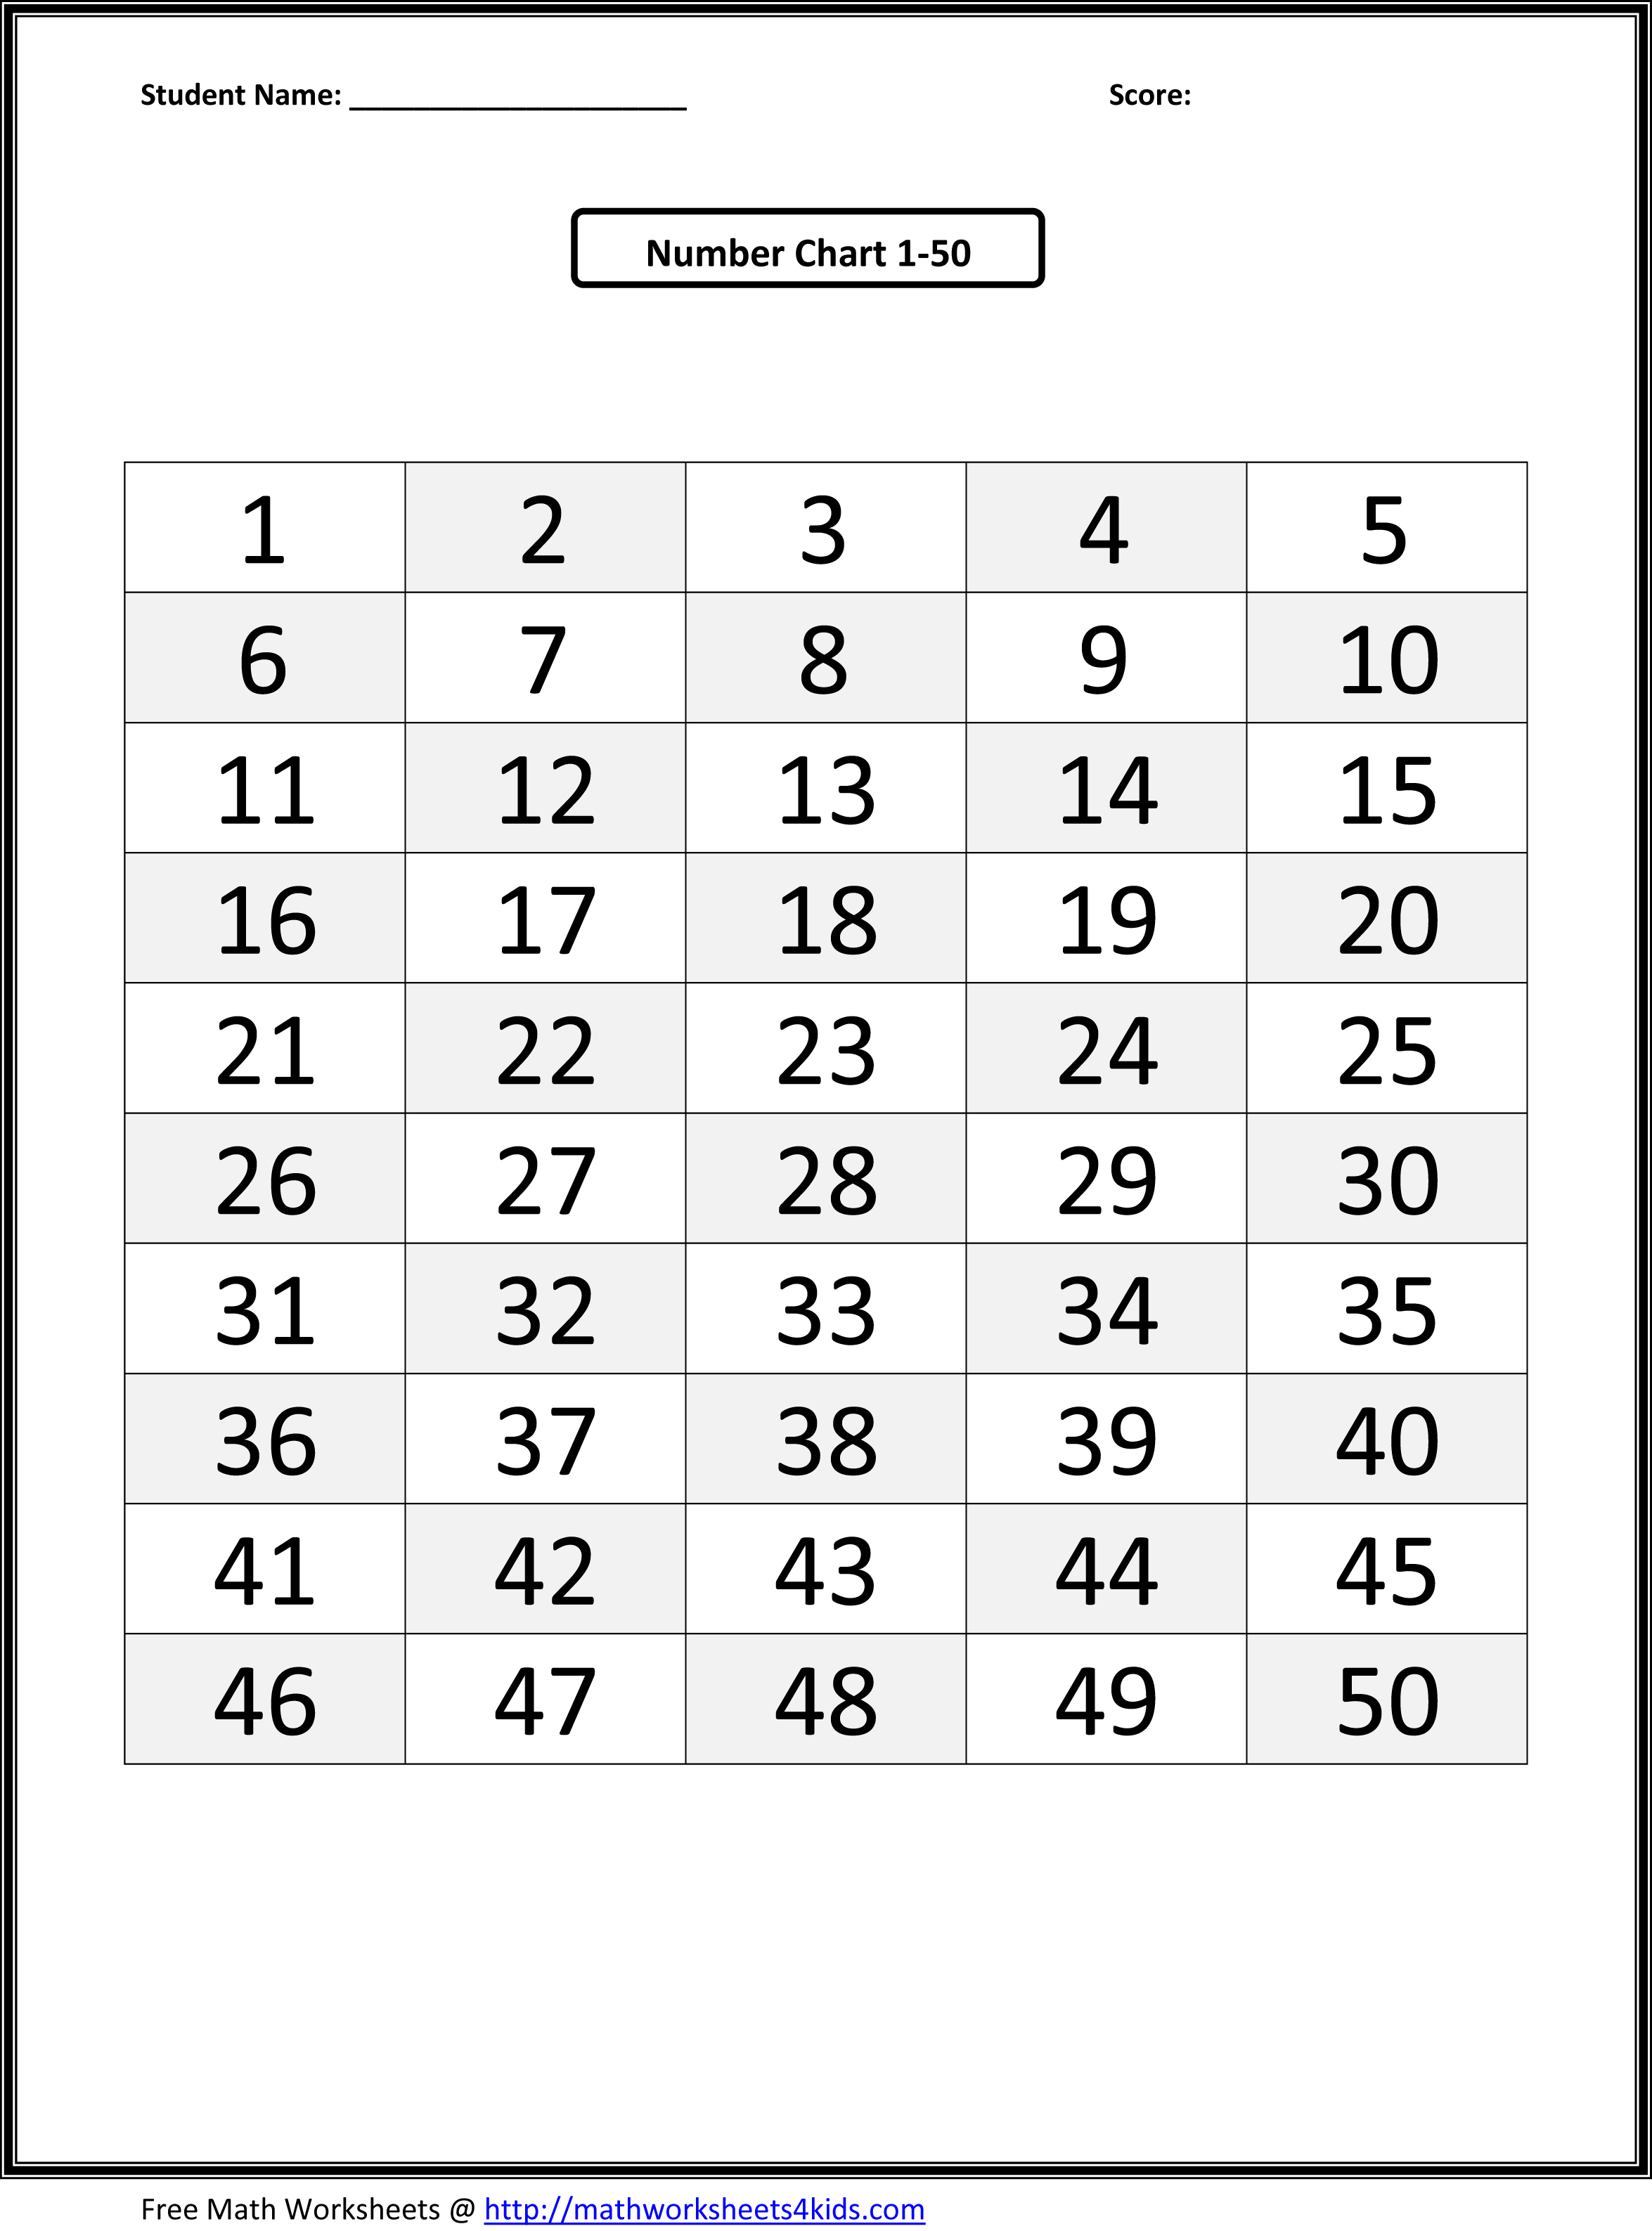 6 Best Images Of Printable Number Chart 1 50 Printable Number Chart 1